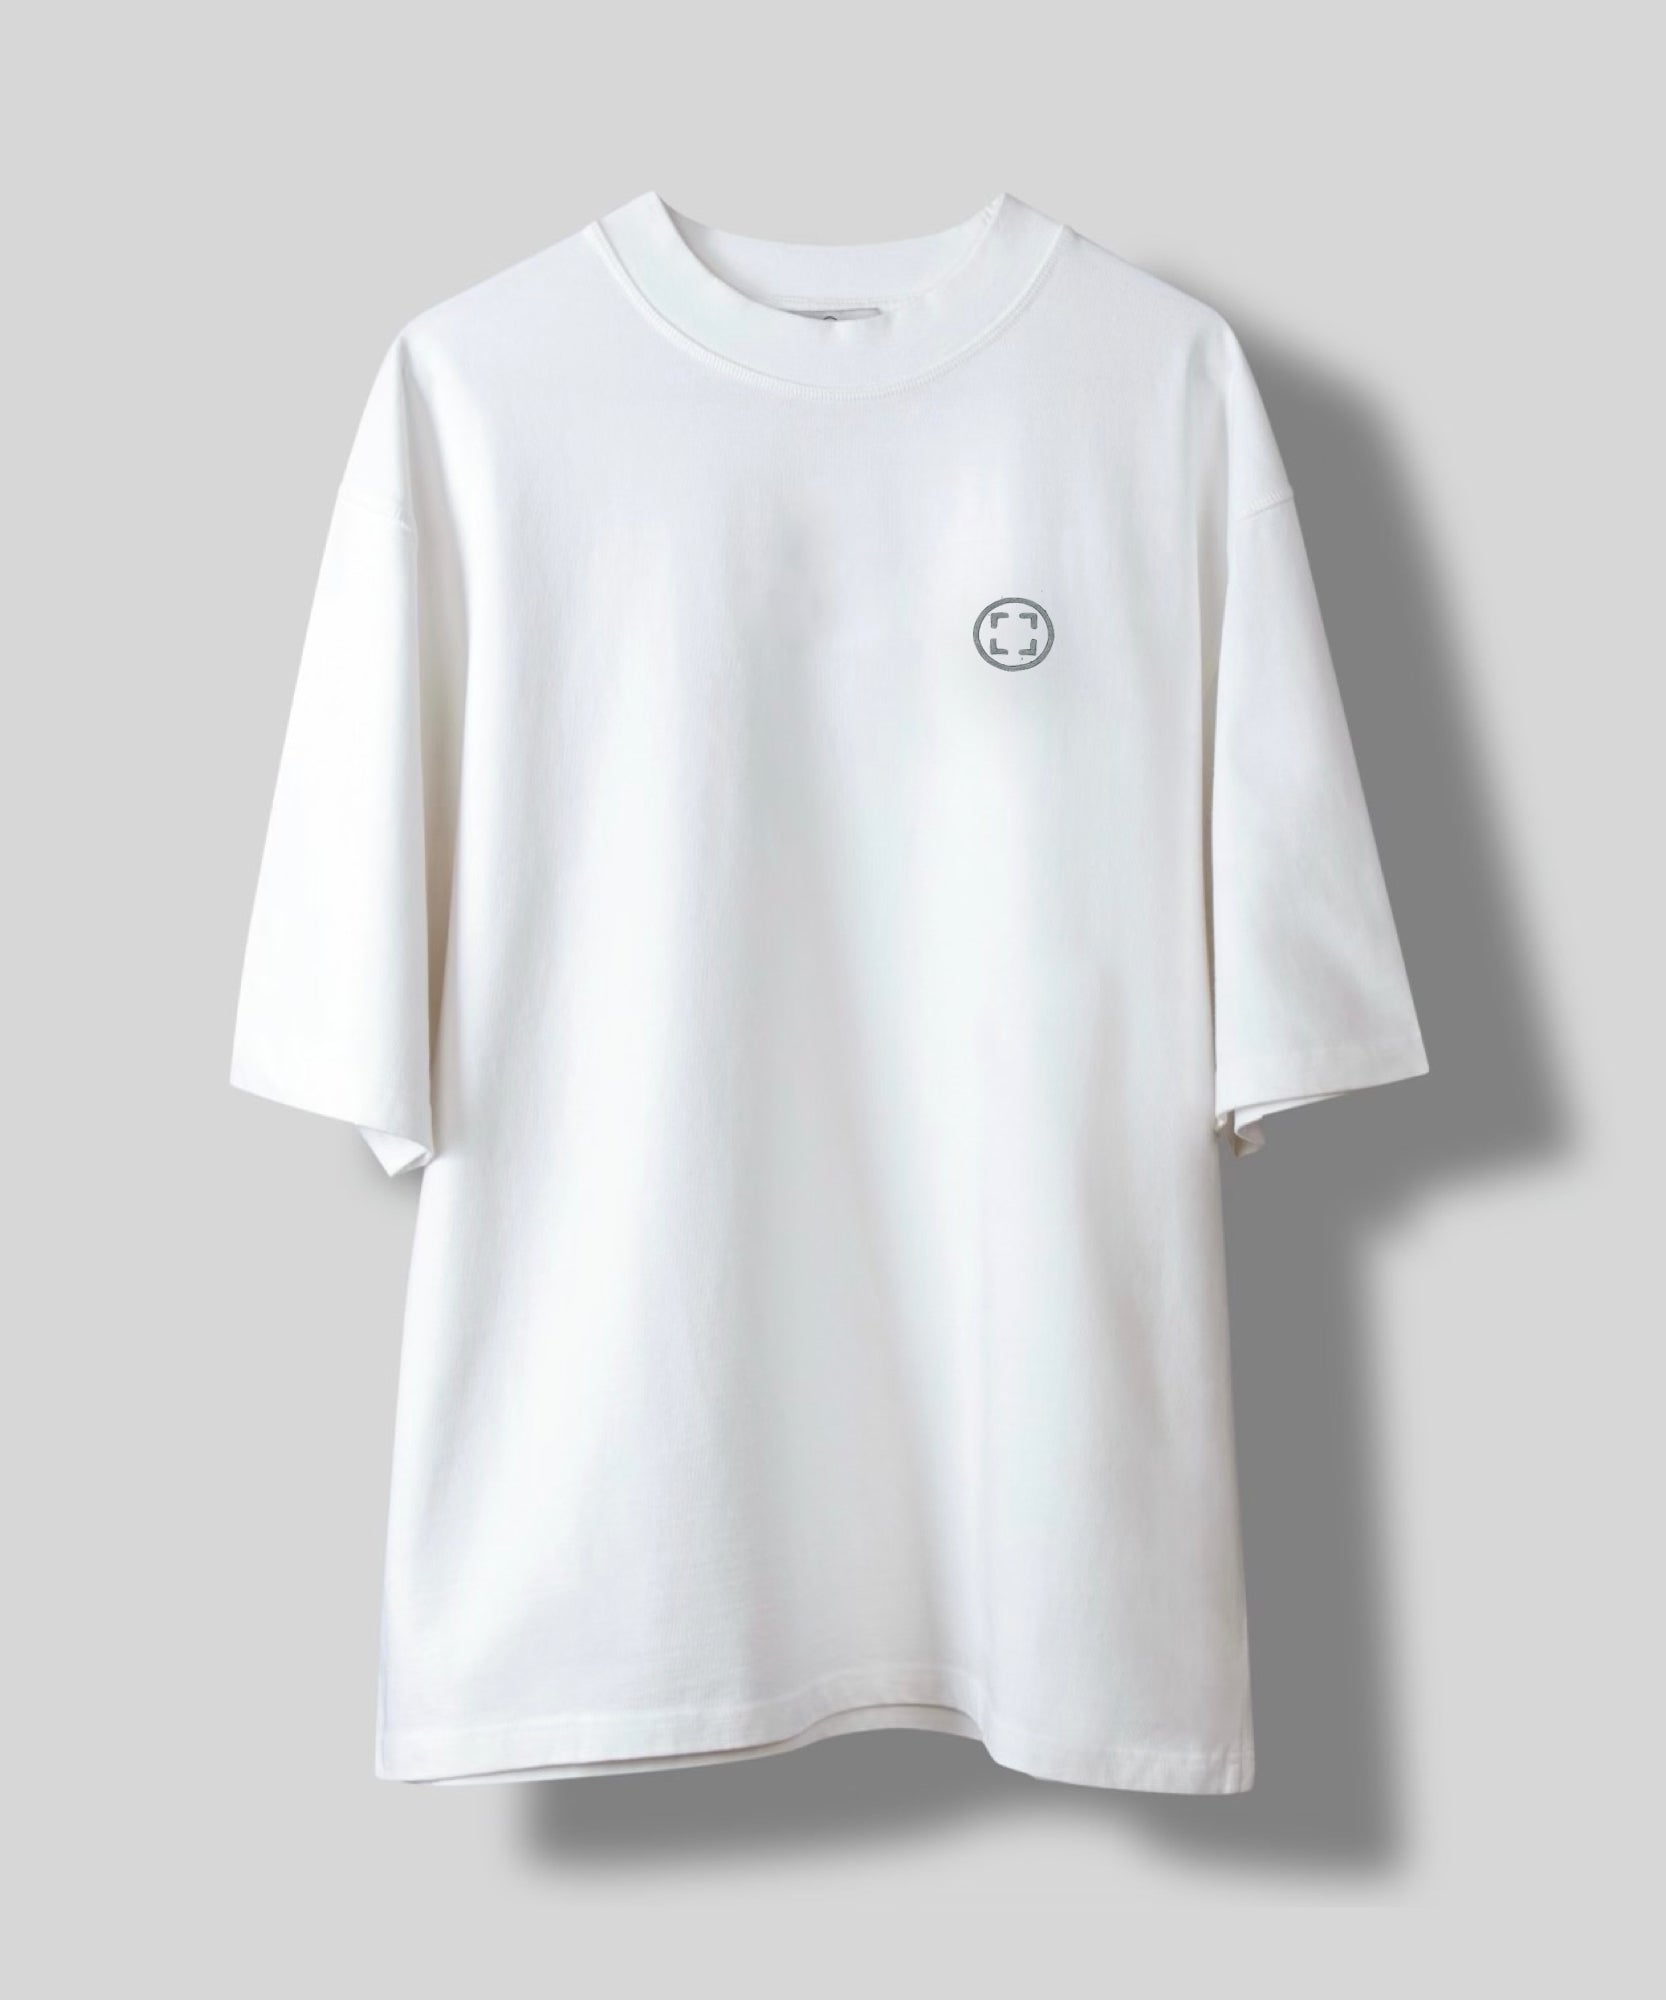 DOUBLE-PACK OVERSIZE T-SHIRT "T5" OFF-WHITE